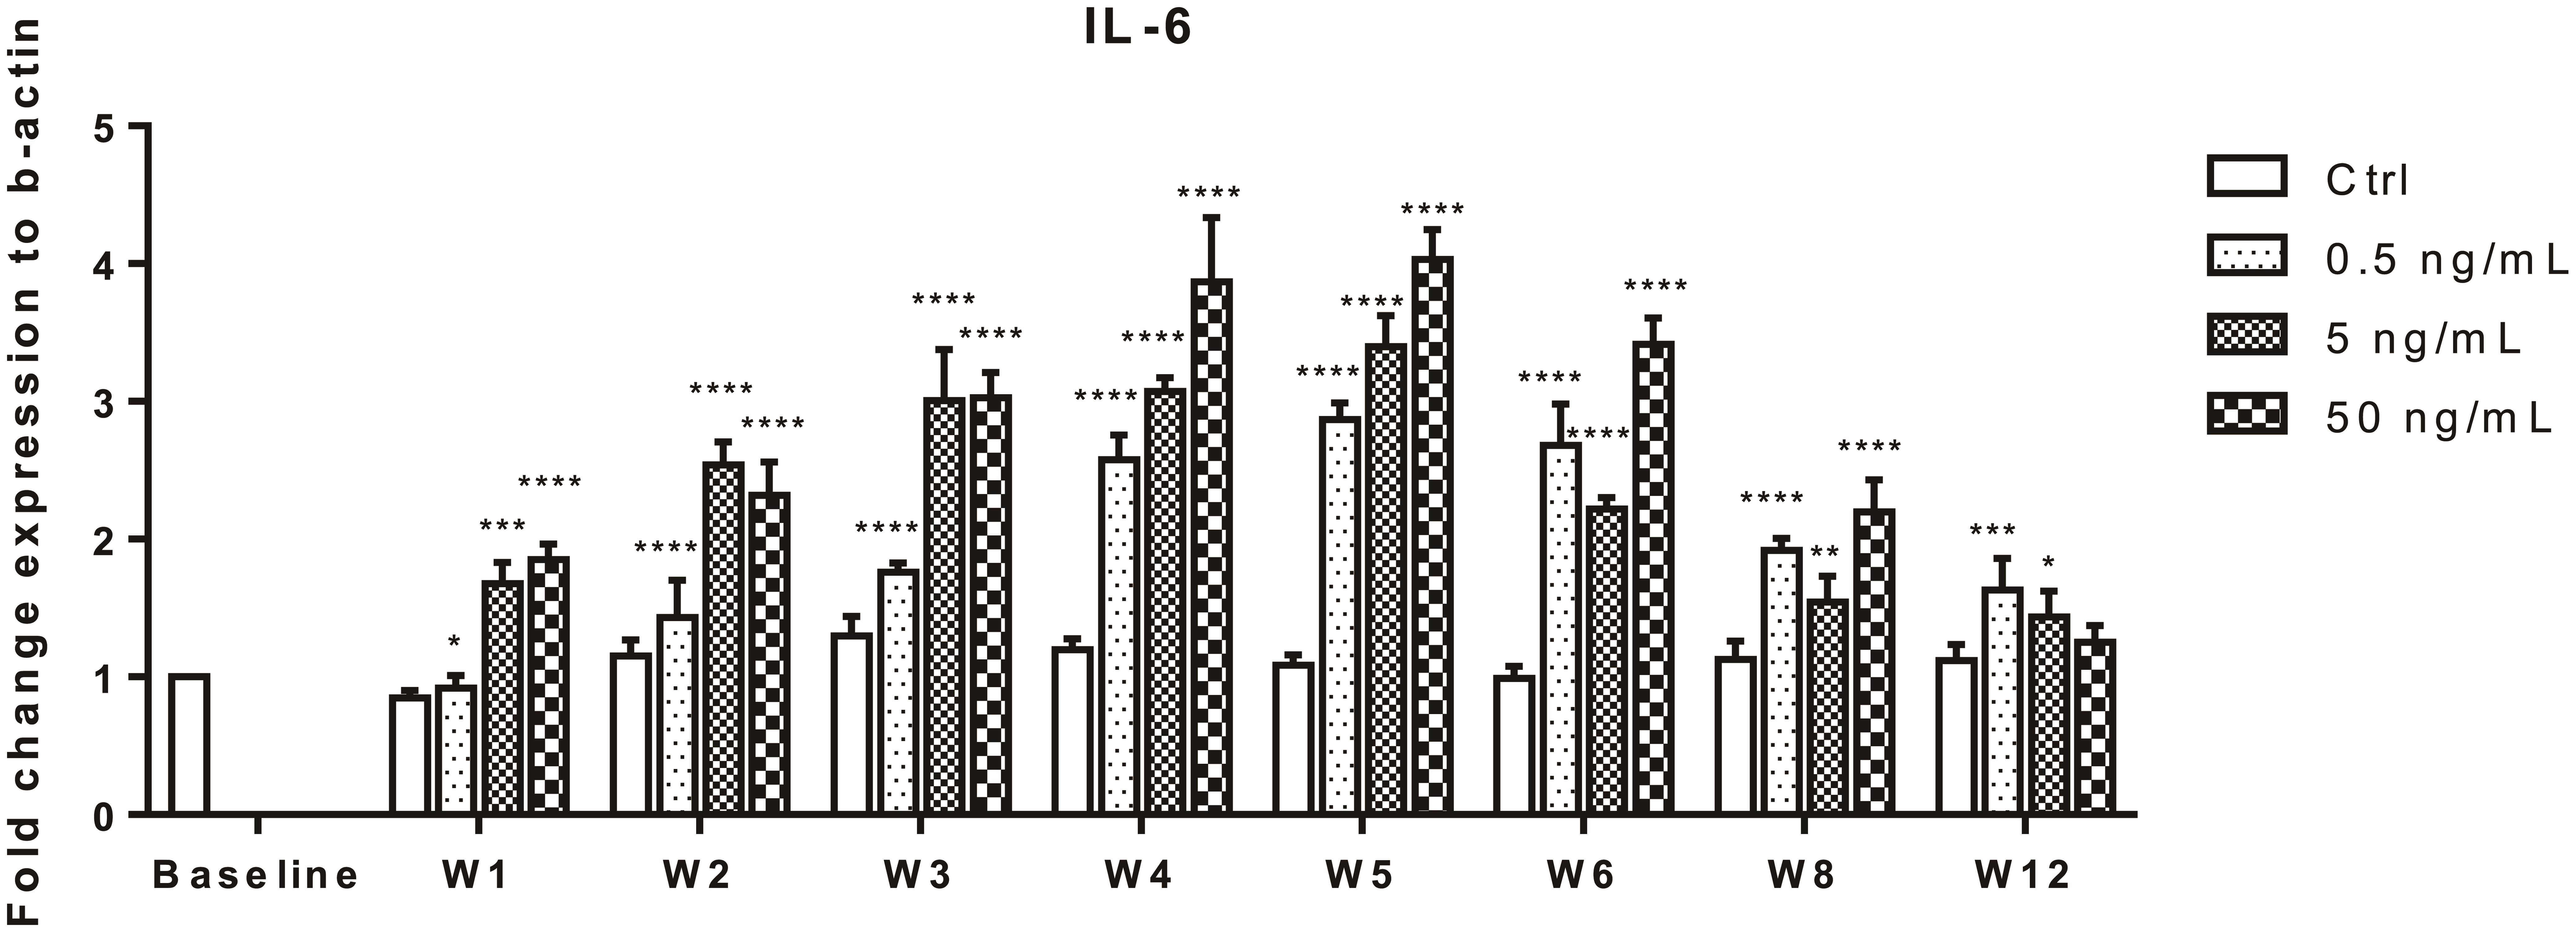 Effects of FGF19 exposure on H69 cholangiocyte IL-6 expression.